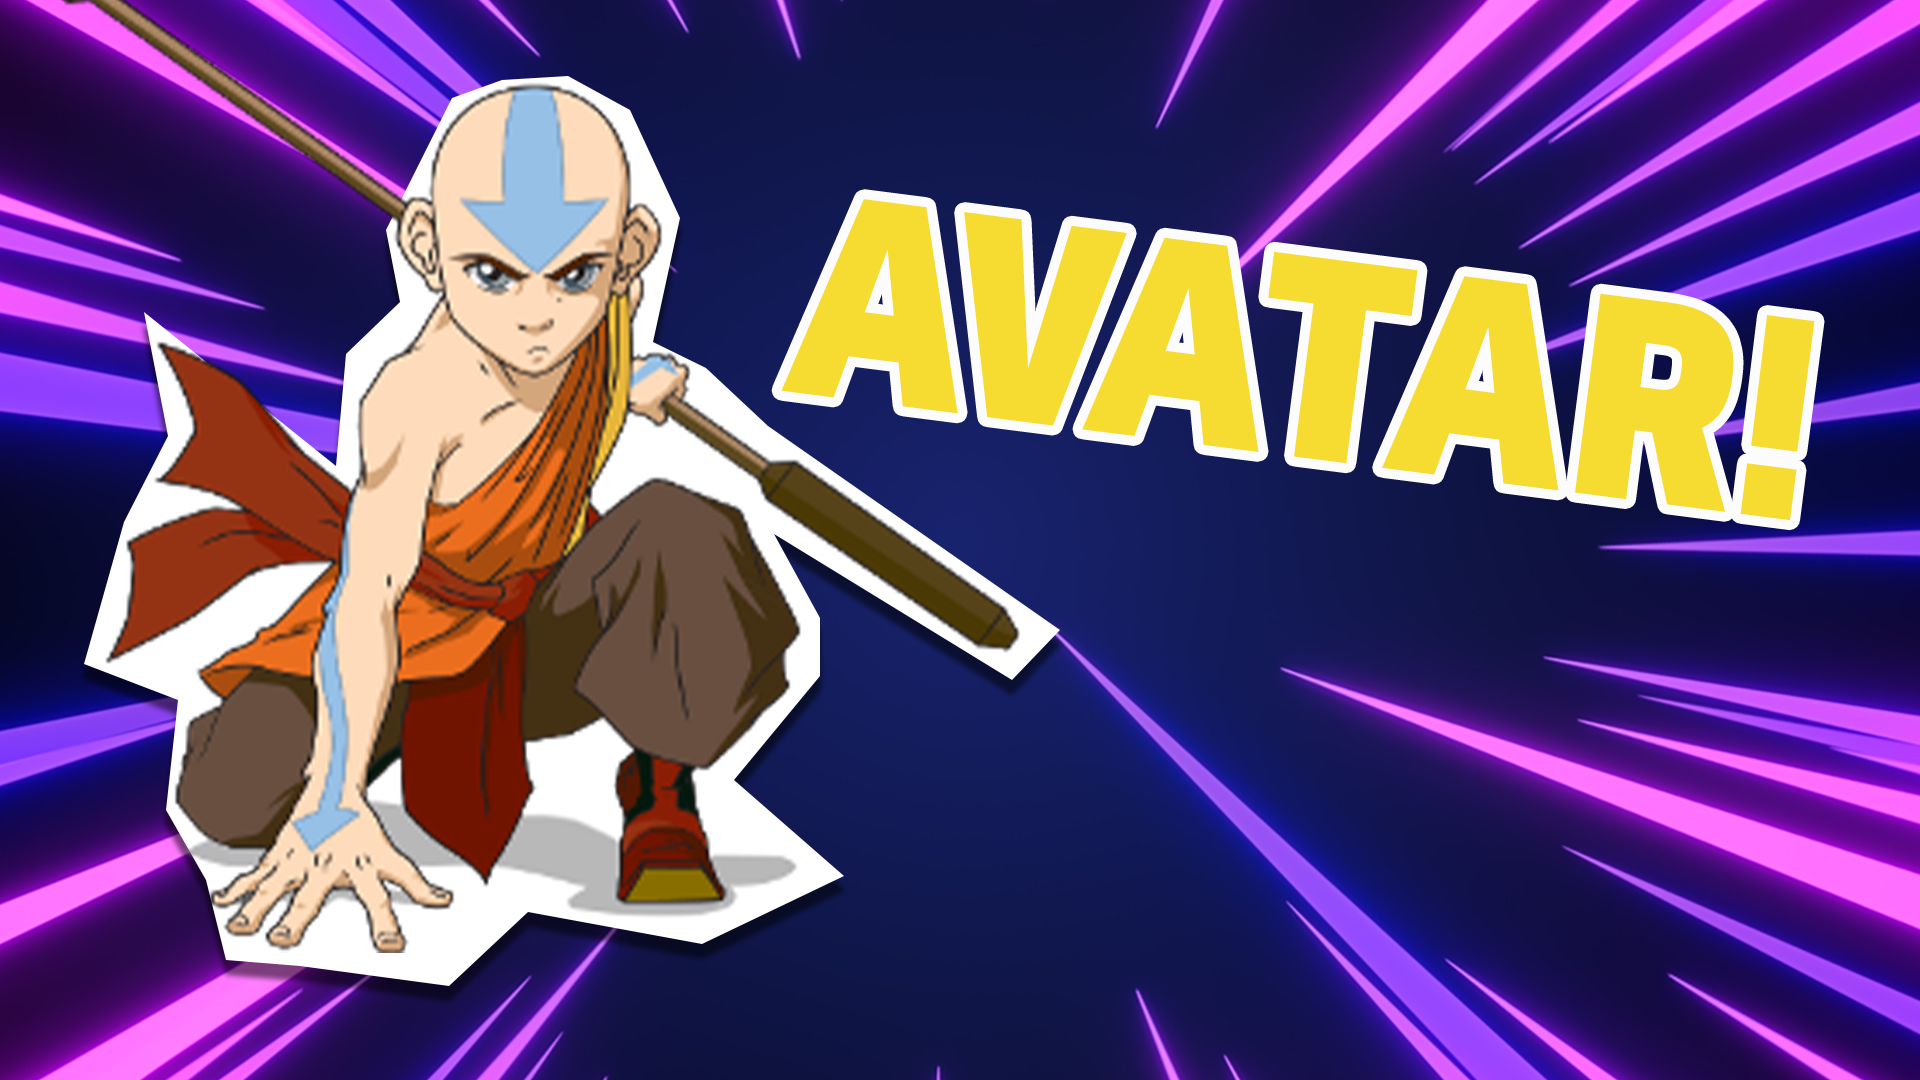 You should watch Avatar! It's jam packed with action, adventure and great messages about friendship and community, and it'll make you want to find out your own elemental super powers!